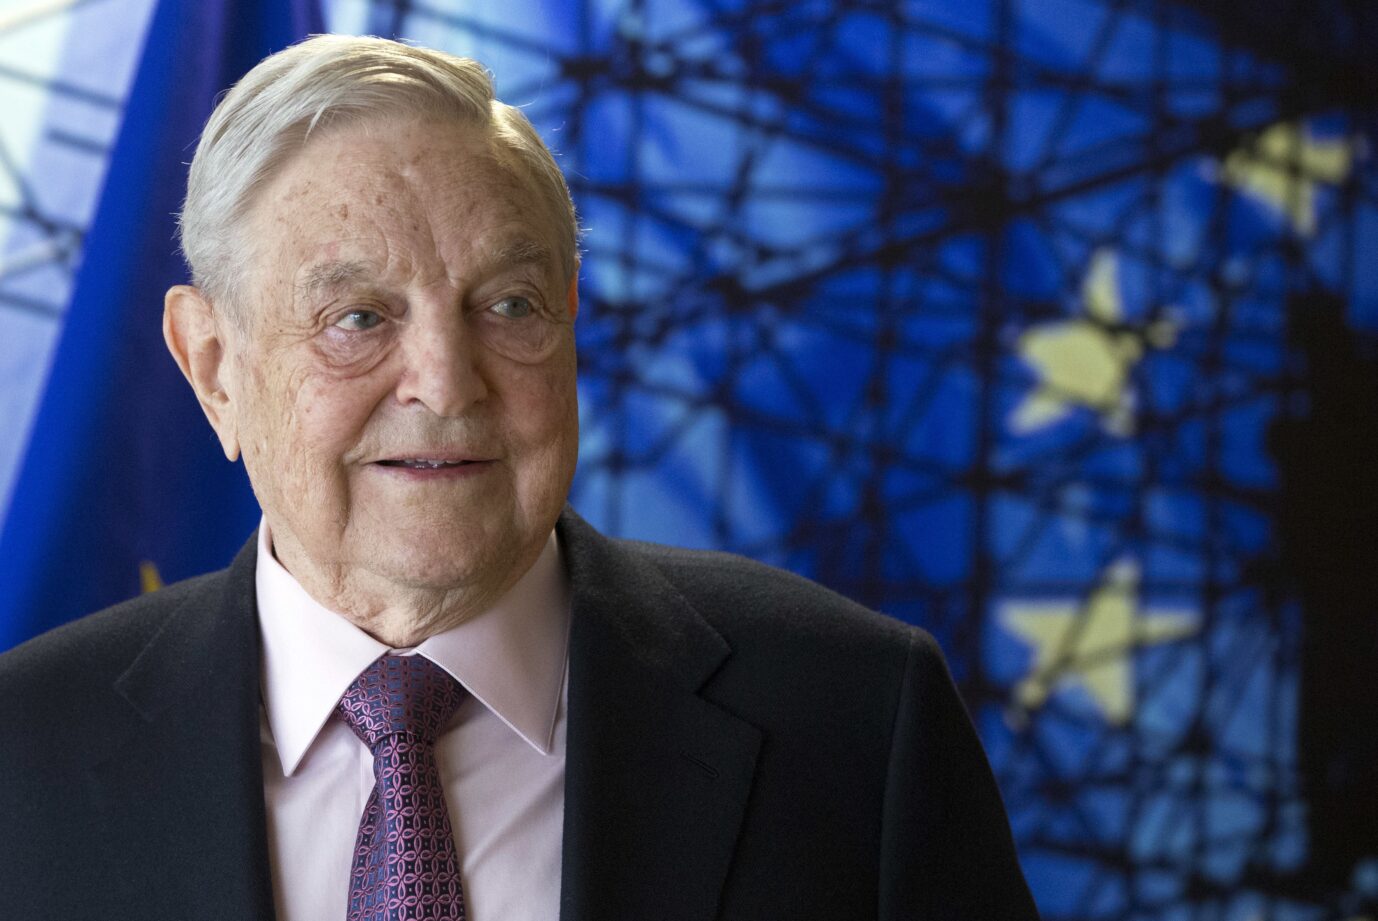 FILE - This is a Thursday, April 27, 2017 file photo of George Soros, Founder and Chairman of the Open Society Foundation, as he waits for the start of a meeting at EU headquarters in Brussels . Investor George Soros hit back Thursday June 1, 2017, against Hungarian Prime Minister Viktor Orban over the leader’s attempts to shut down a Budapest university which Soros founded after the fall of communism. (Olivier Hoslet, Pool Photo, File, via AP)